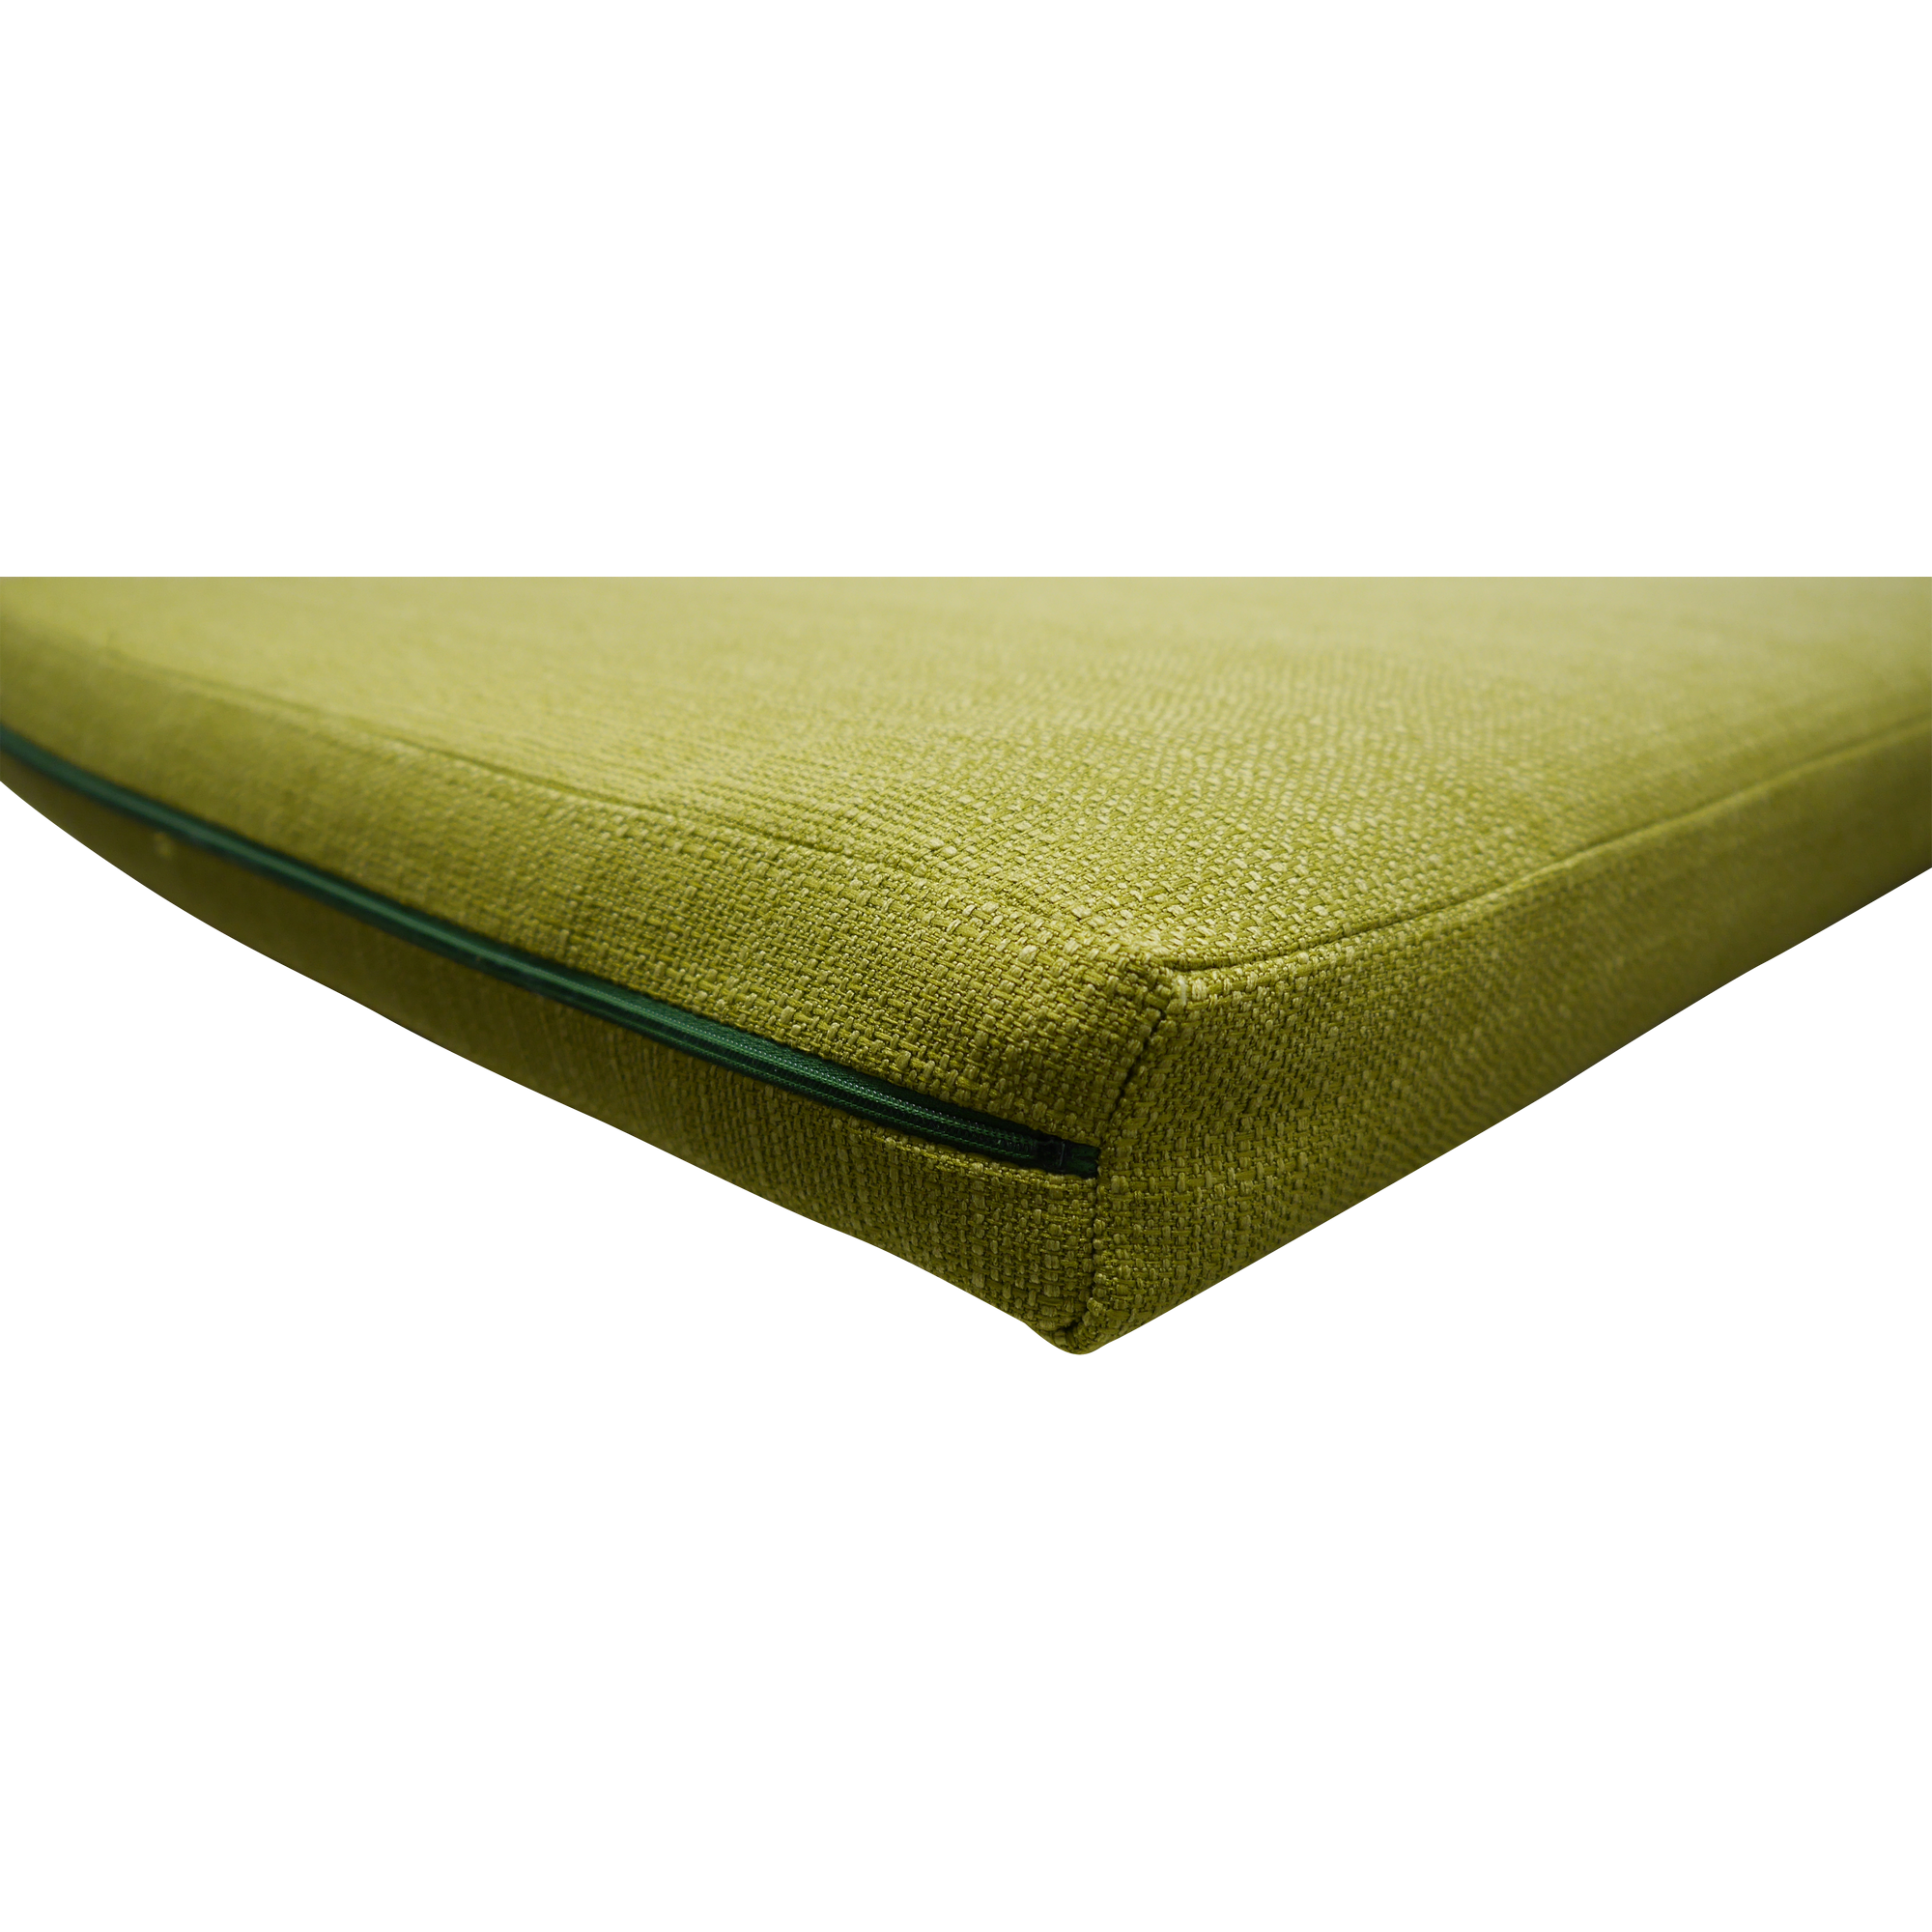 Hollywoodschaukel 'Motion Smart' lime 3-Sitzer 210 x 145 x 160 cm + product picture